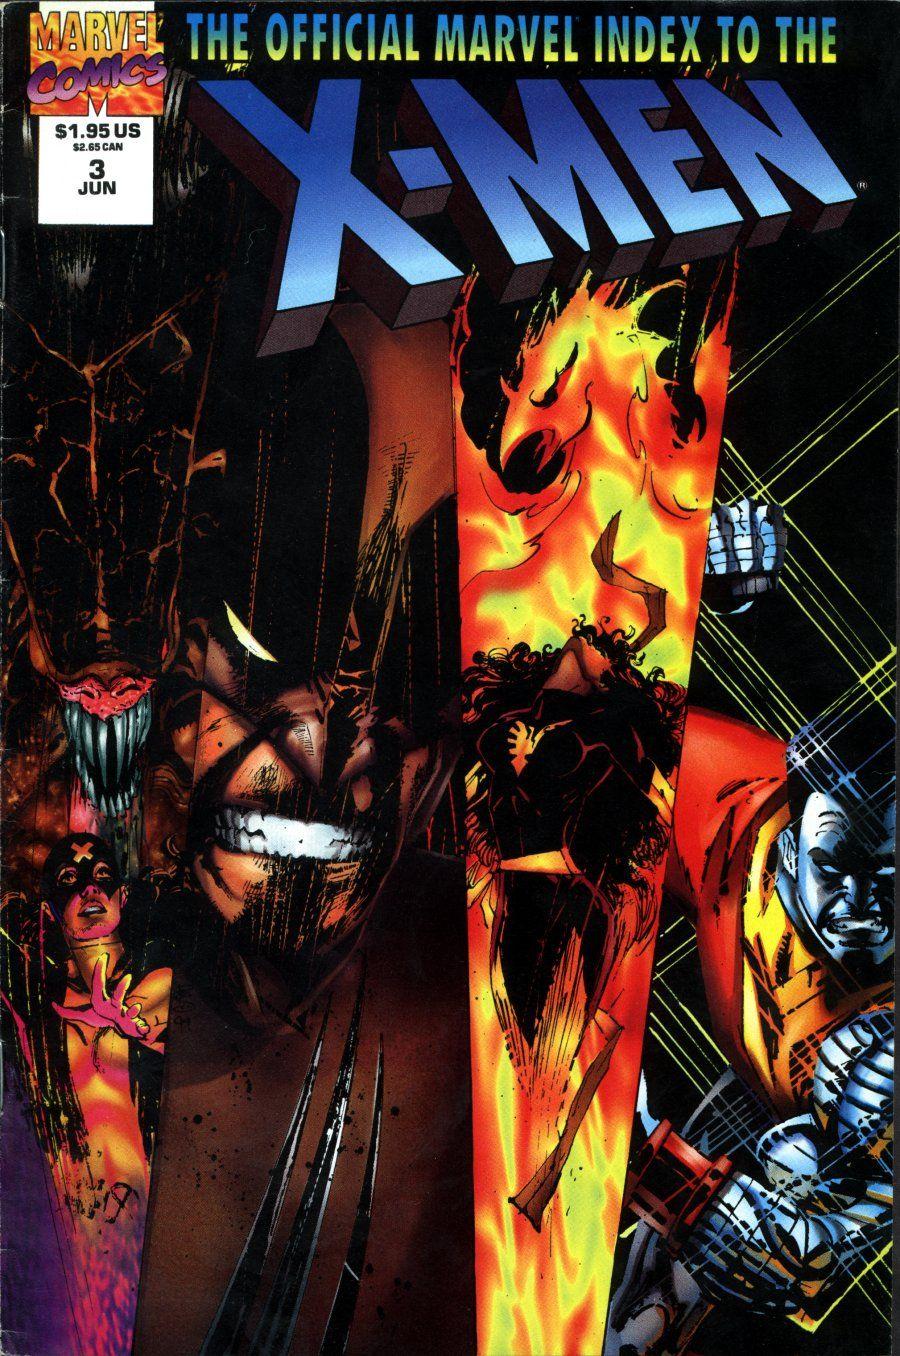 The Official Marvel Index to the X-Men Vol. 2 #3